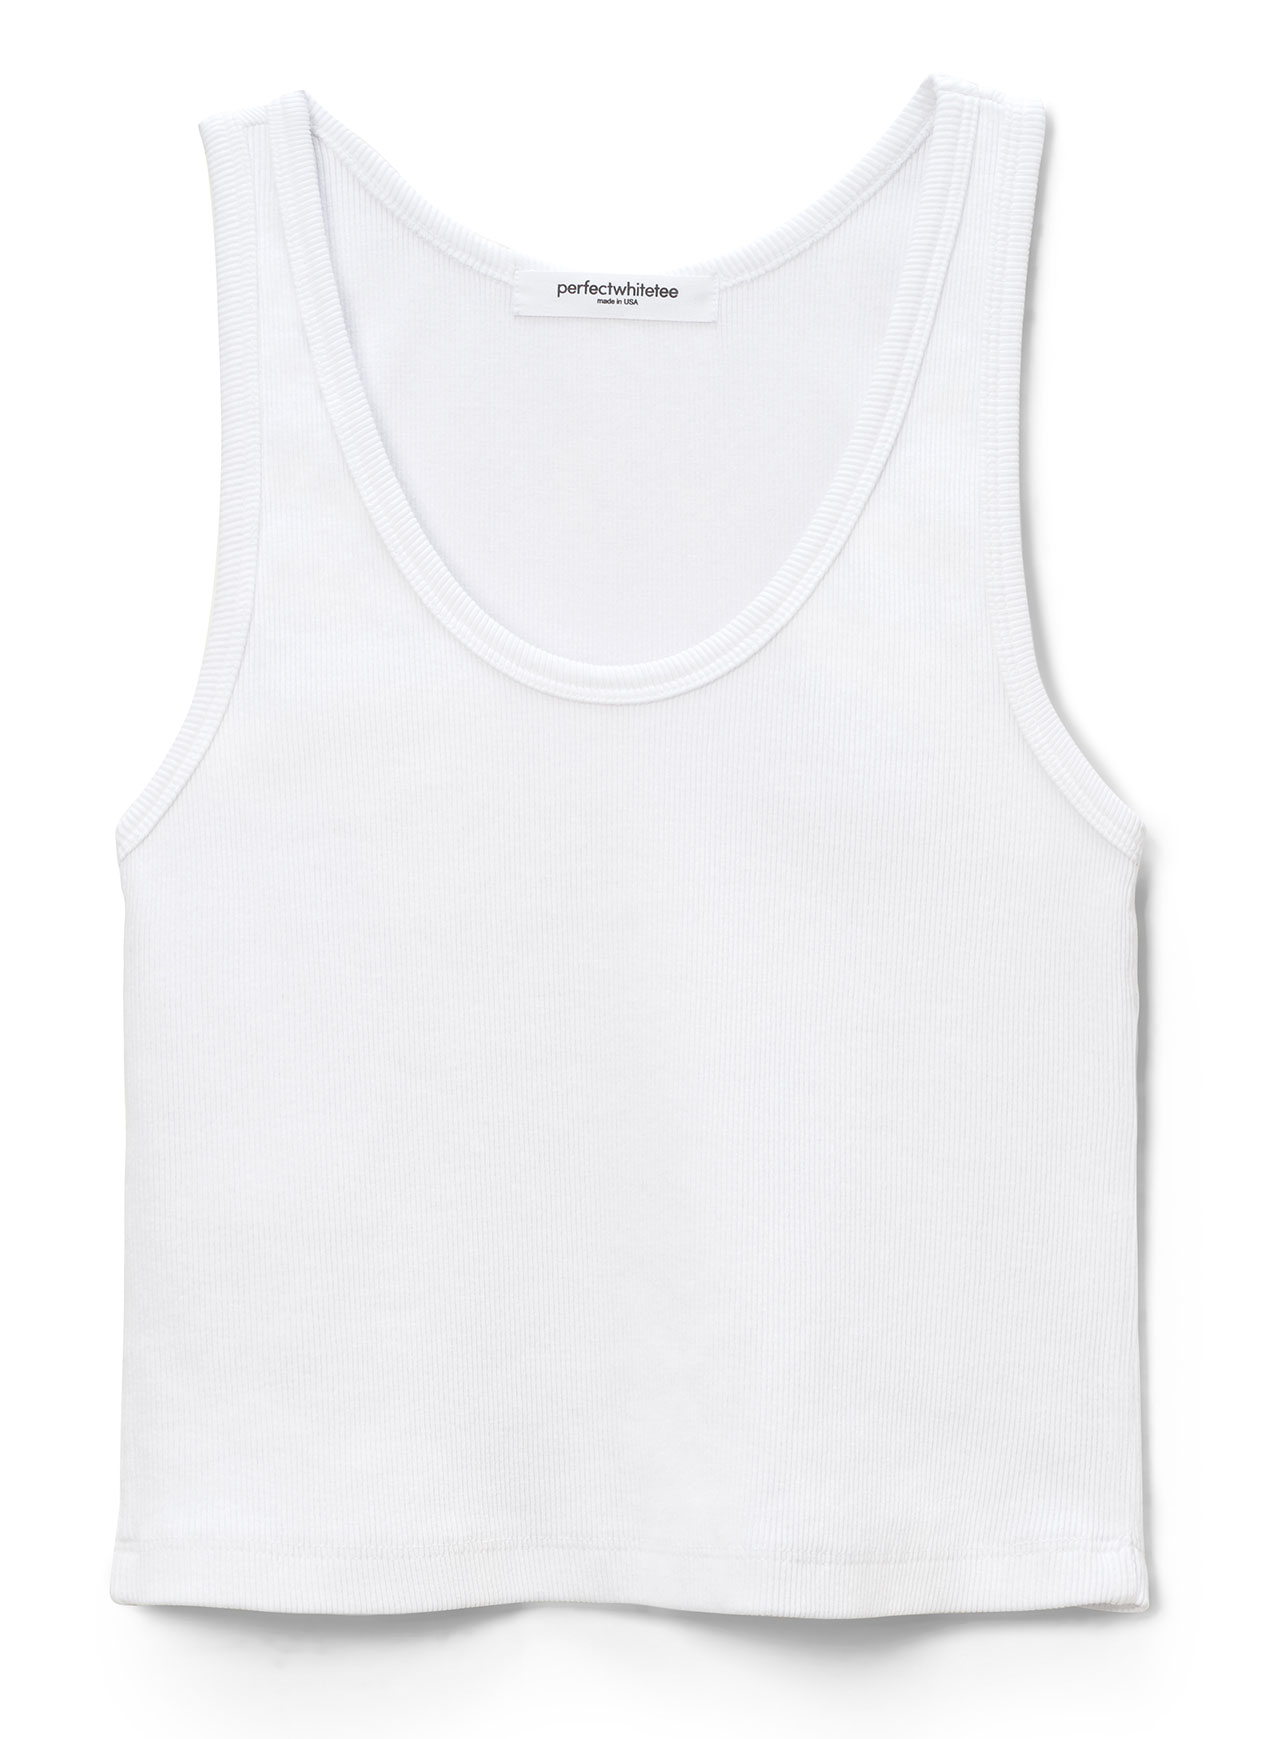 Shop Perfectwhitetee Best-Selling Tees, Tanks and More